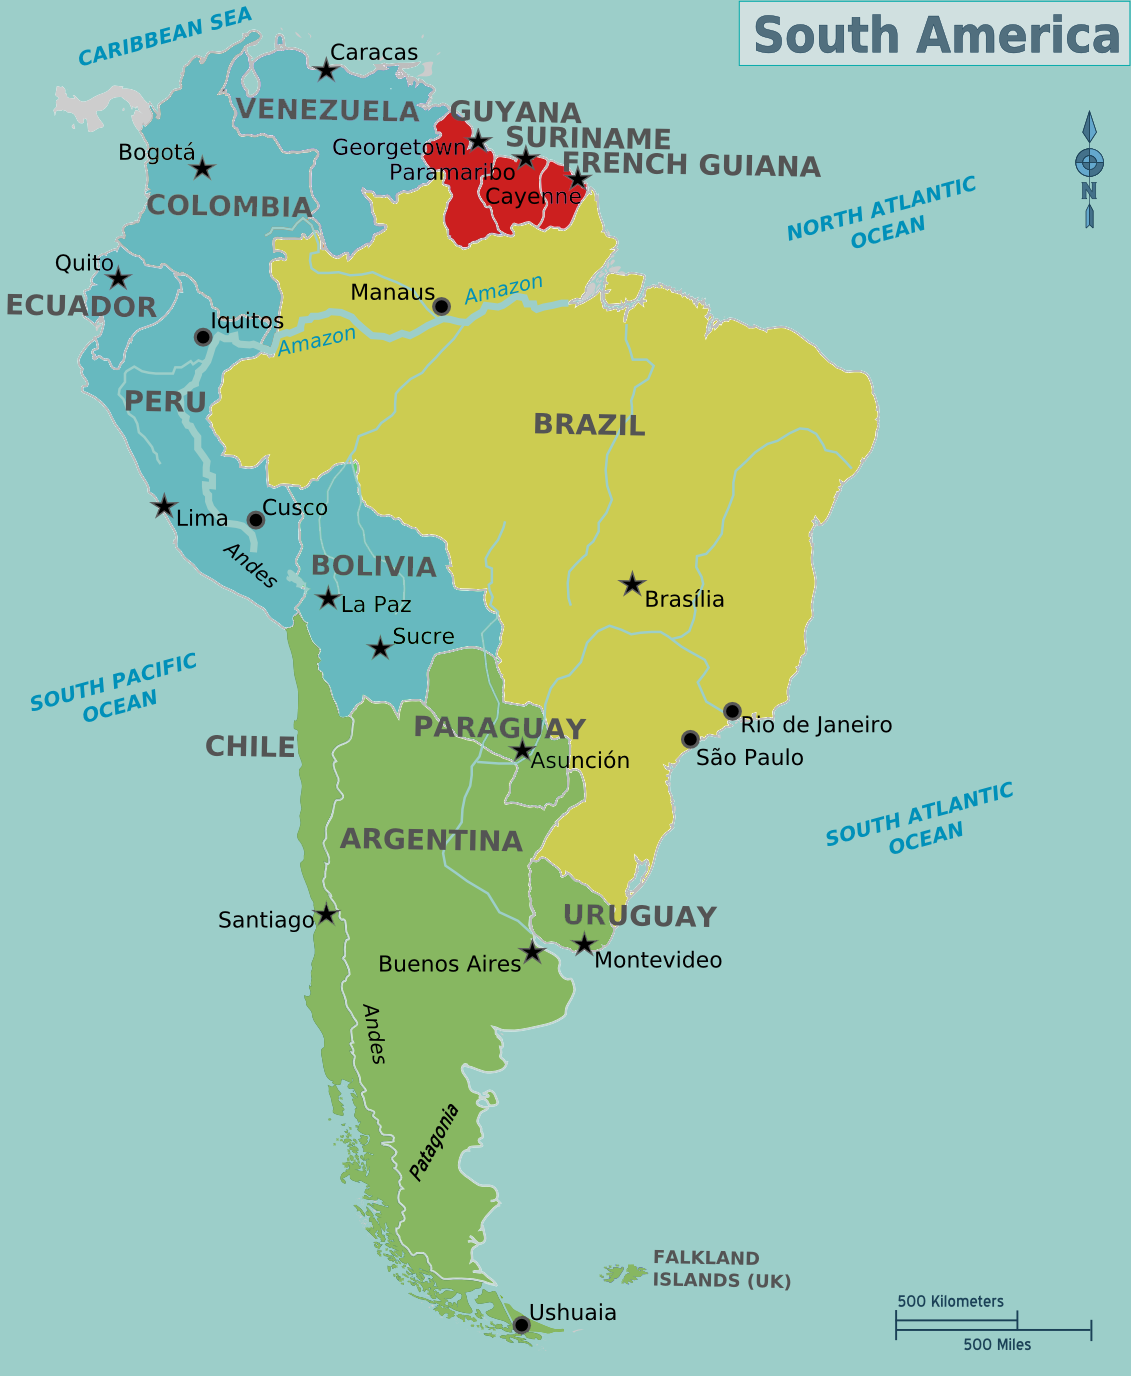 https://upload.wikimedia.org/wikipedia/commons/7/70/South_America_Color-coded_Regions.png